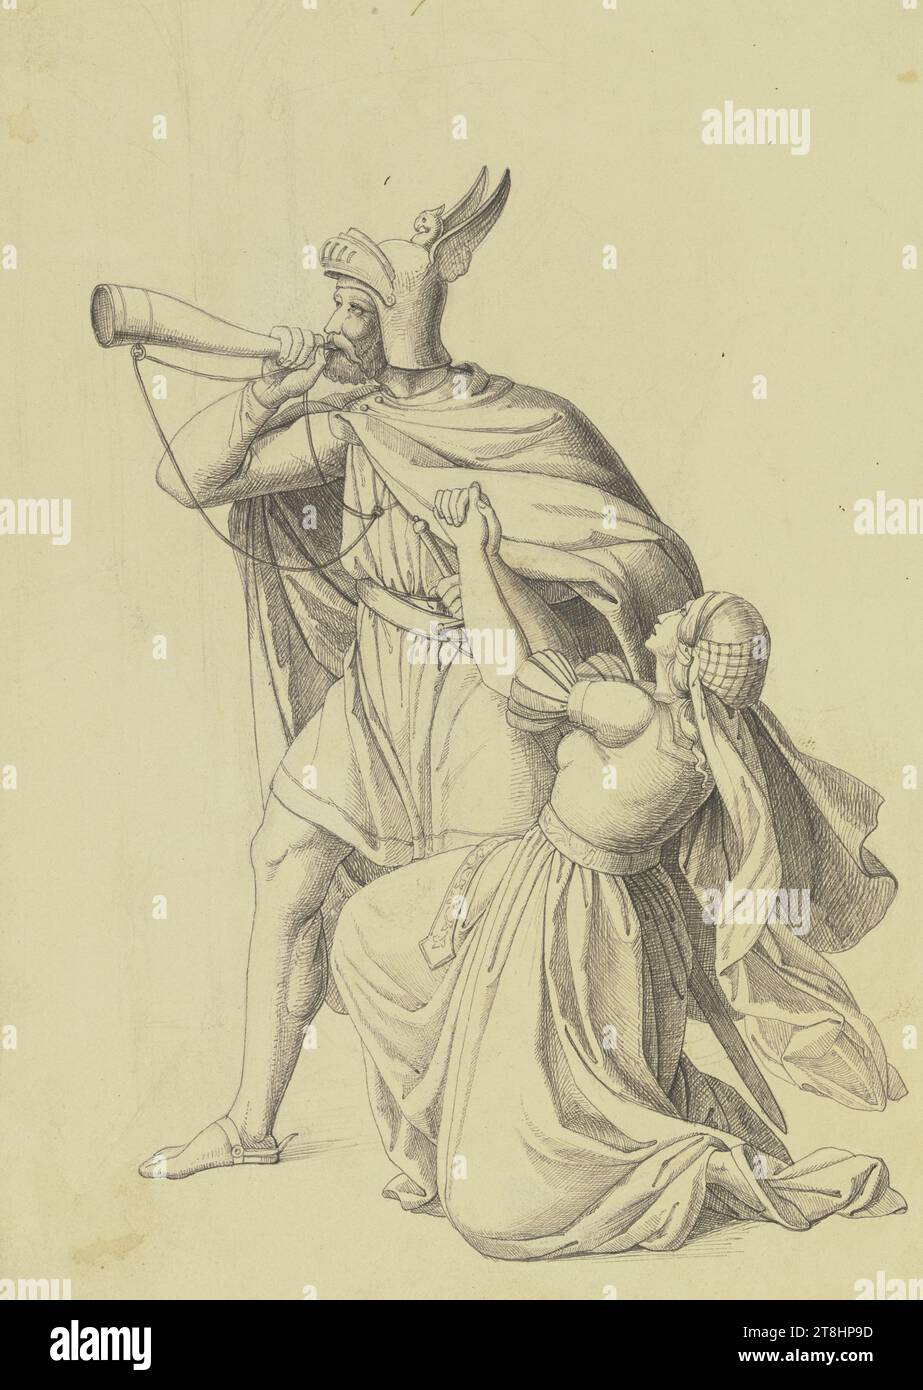 GERMAN, 19TH CENTURY, woman kneeling in front of a warrior blowing a horn, sheet, 227 x 155 mm, black pen over pencil, outline, on yellowish paper, woman kneeling in front of a warrior blowing a horn, German, 19th century, 19TH CENTURY, DRAWING, pen in black over pencil, contour with pencil, on yellowish paper, INK?, INK?, GRAPHITE-CLAY MIXTURE, PAPER, PEN DRAWING, PENCIL DRAWING, PEN DRAWING, GERMAN, PICTURED DRAWING Stock Photo